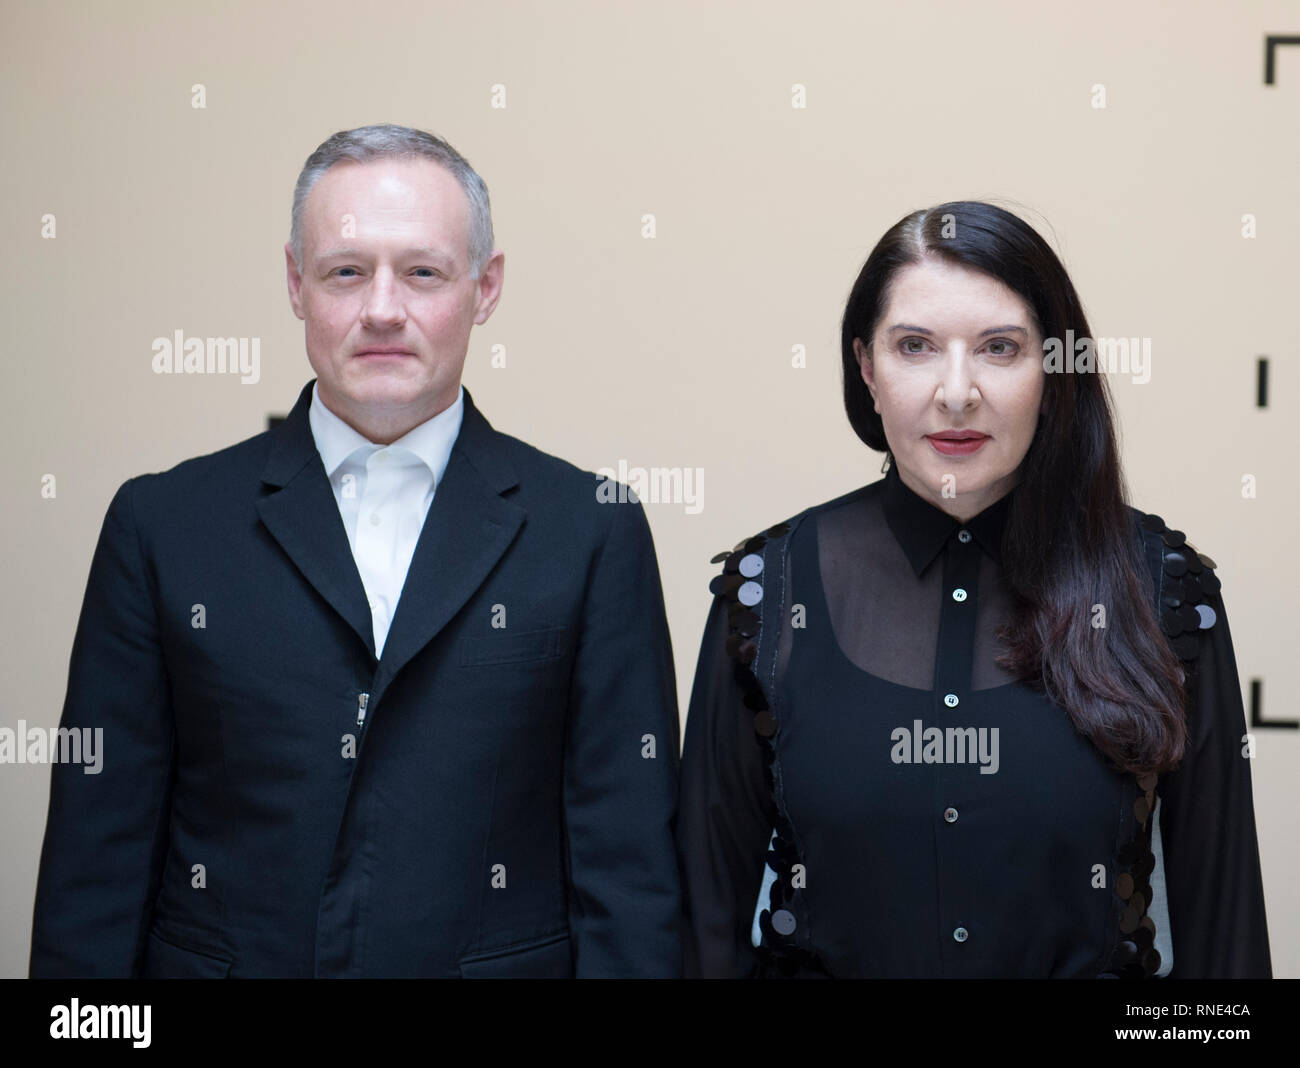 Serpentine Gallery, London, UK. 18 February, 2019. Art and technology combine for a world first with Marina Abramović (photo - right with Tod Eckert, founder of Tin Drum - The Life producers), the pioneering performance artist, and the presentation of her latest performance: The Life in Mixed Reality (a wearable augmented experience). For 1 week, the Serpentine Galleries host The Life with visitors simultaneously experiencinge an intimate, digital encounter with the artist in this first, large-scale performance exhibited using Mixed Reality anywhere in the world. Credit: Malcolm Park/Alamy Stock Photo